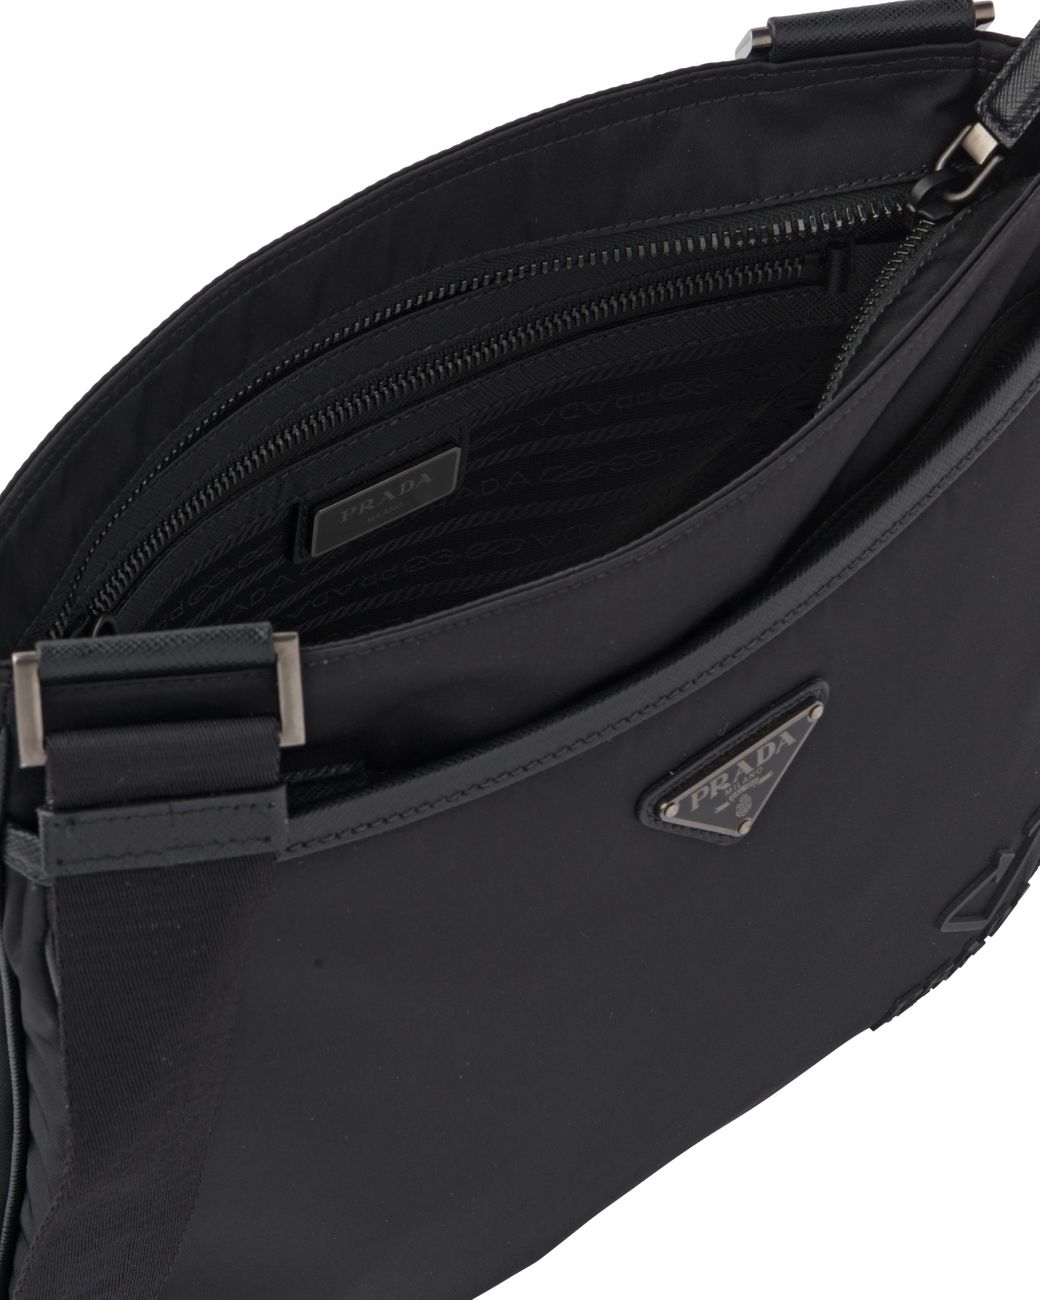 PD258 Re-Nylon and Saffiano Leather Shoulder Bag / 9.4x7.1x3.4inch –  Hpass168